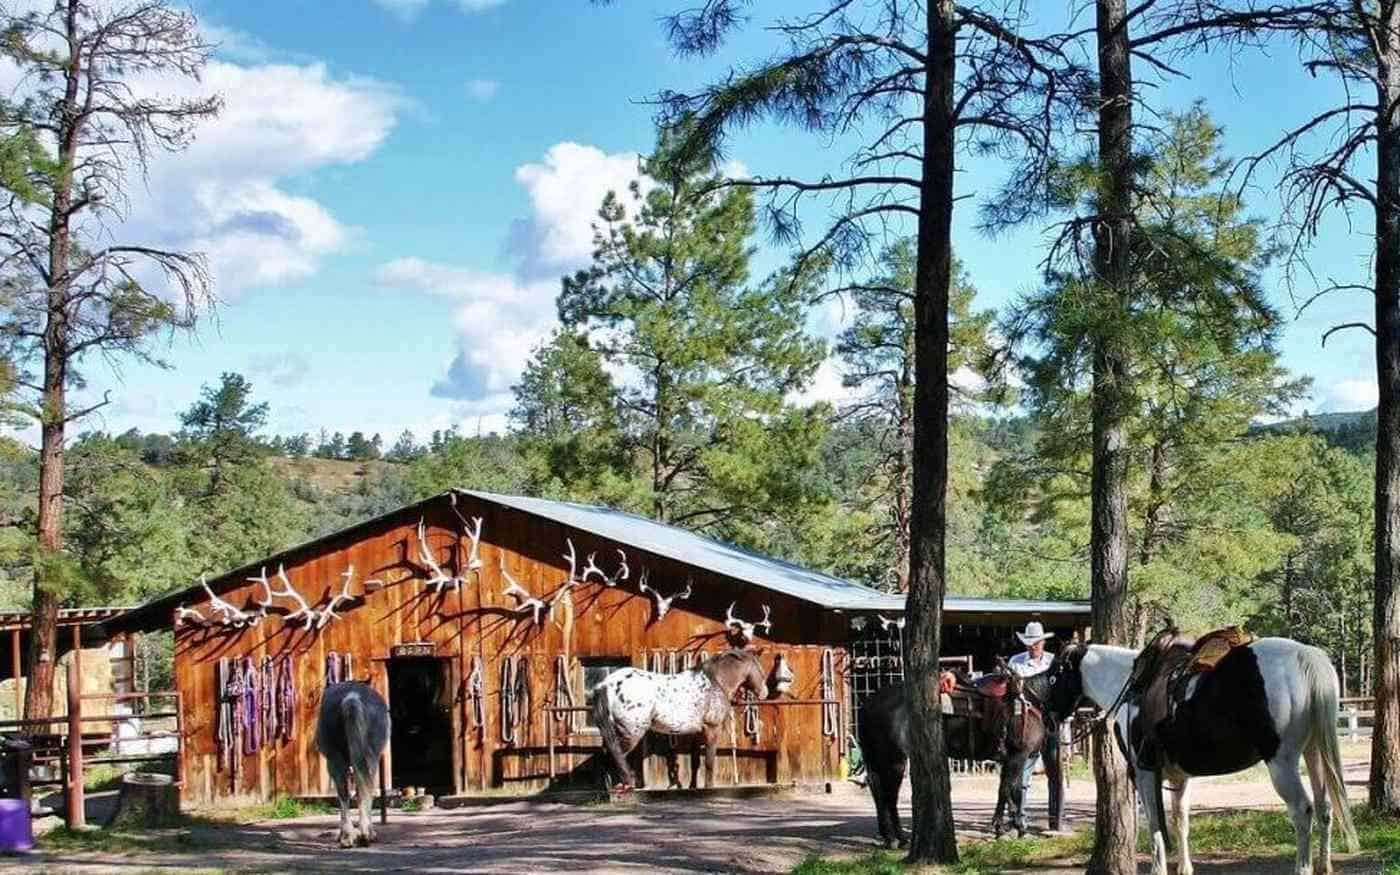 saddling up at the Geronimo Trail Guest Ranch